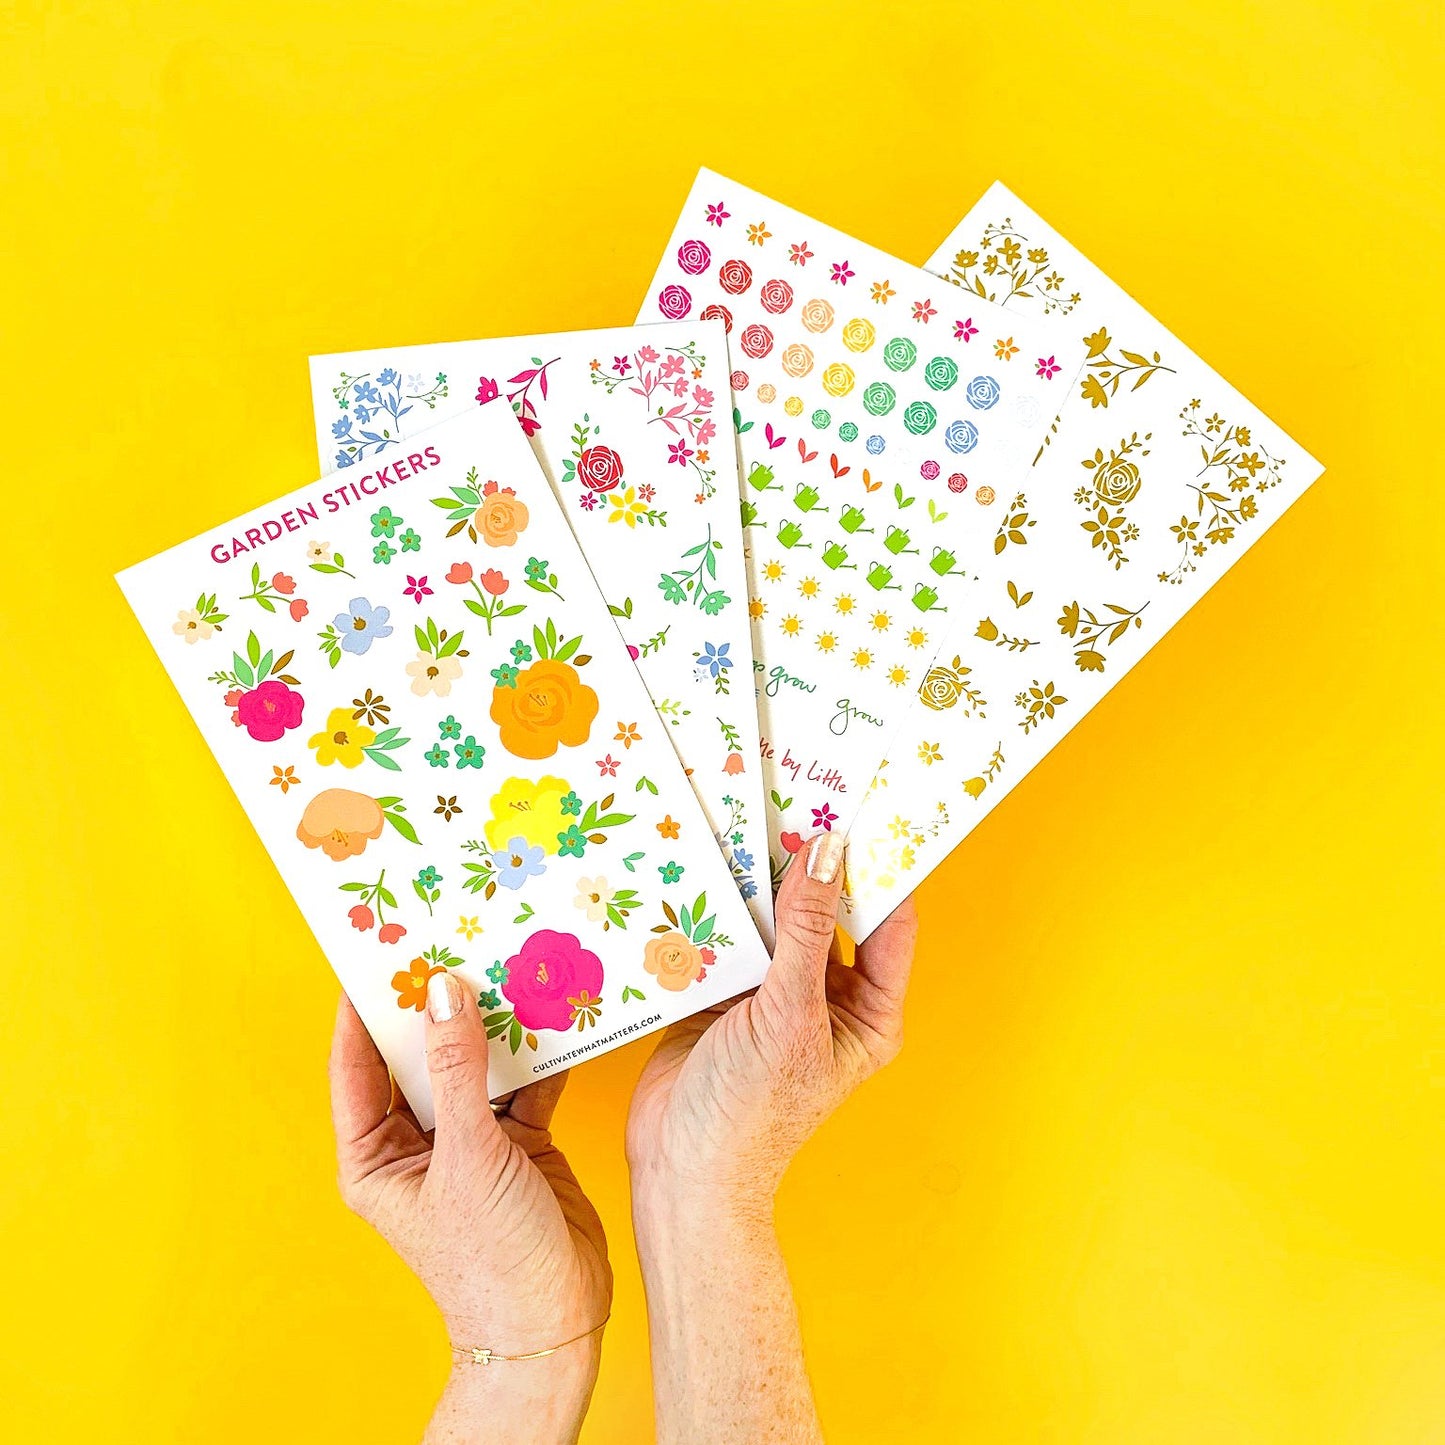 Garden Stickers - Cultivate What Matters - Goal Planning